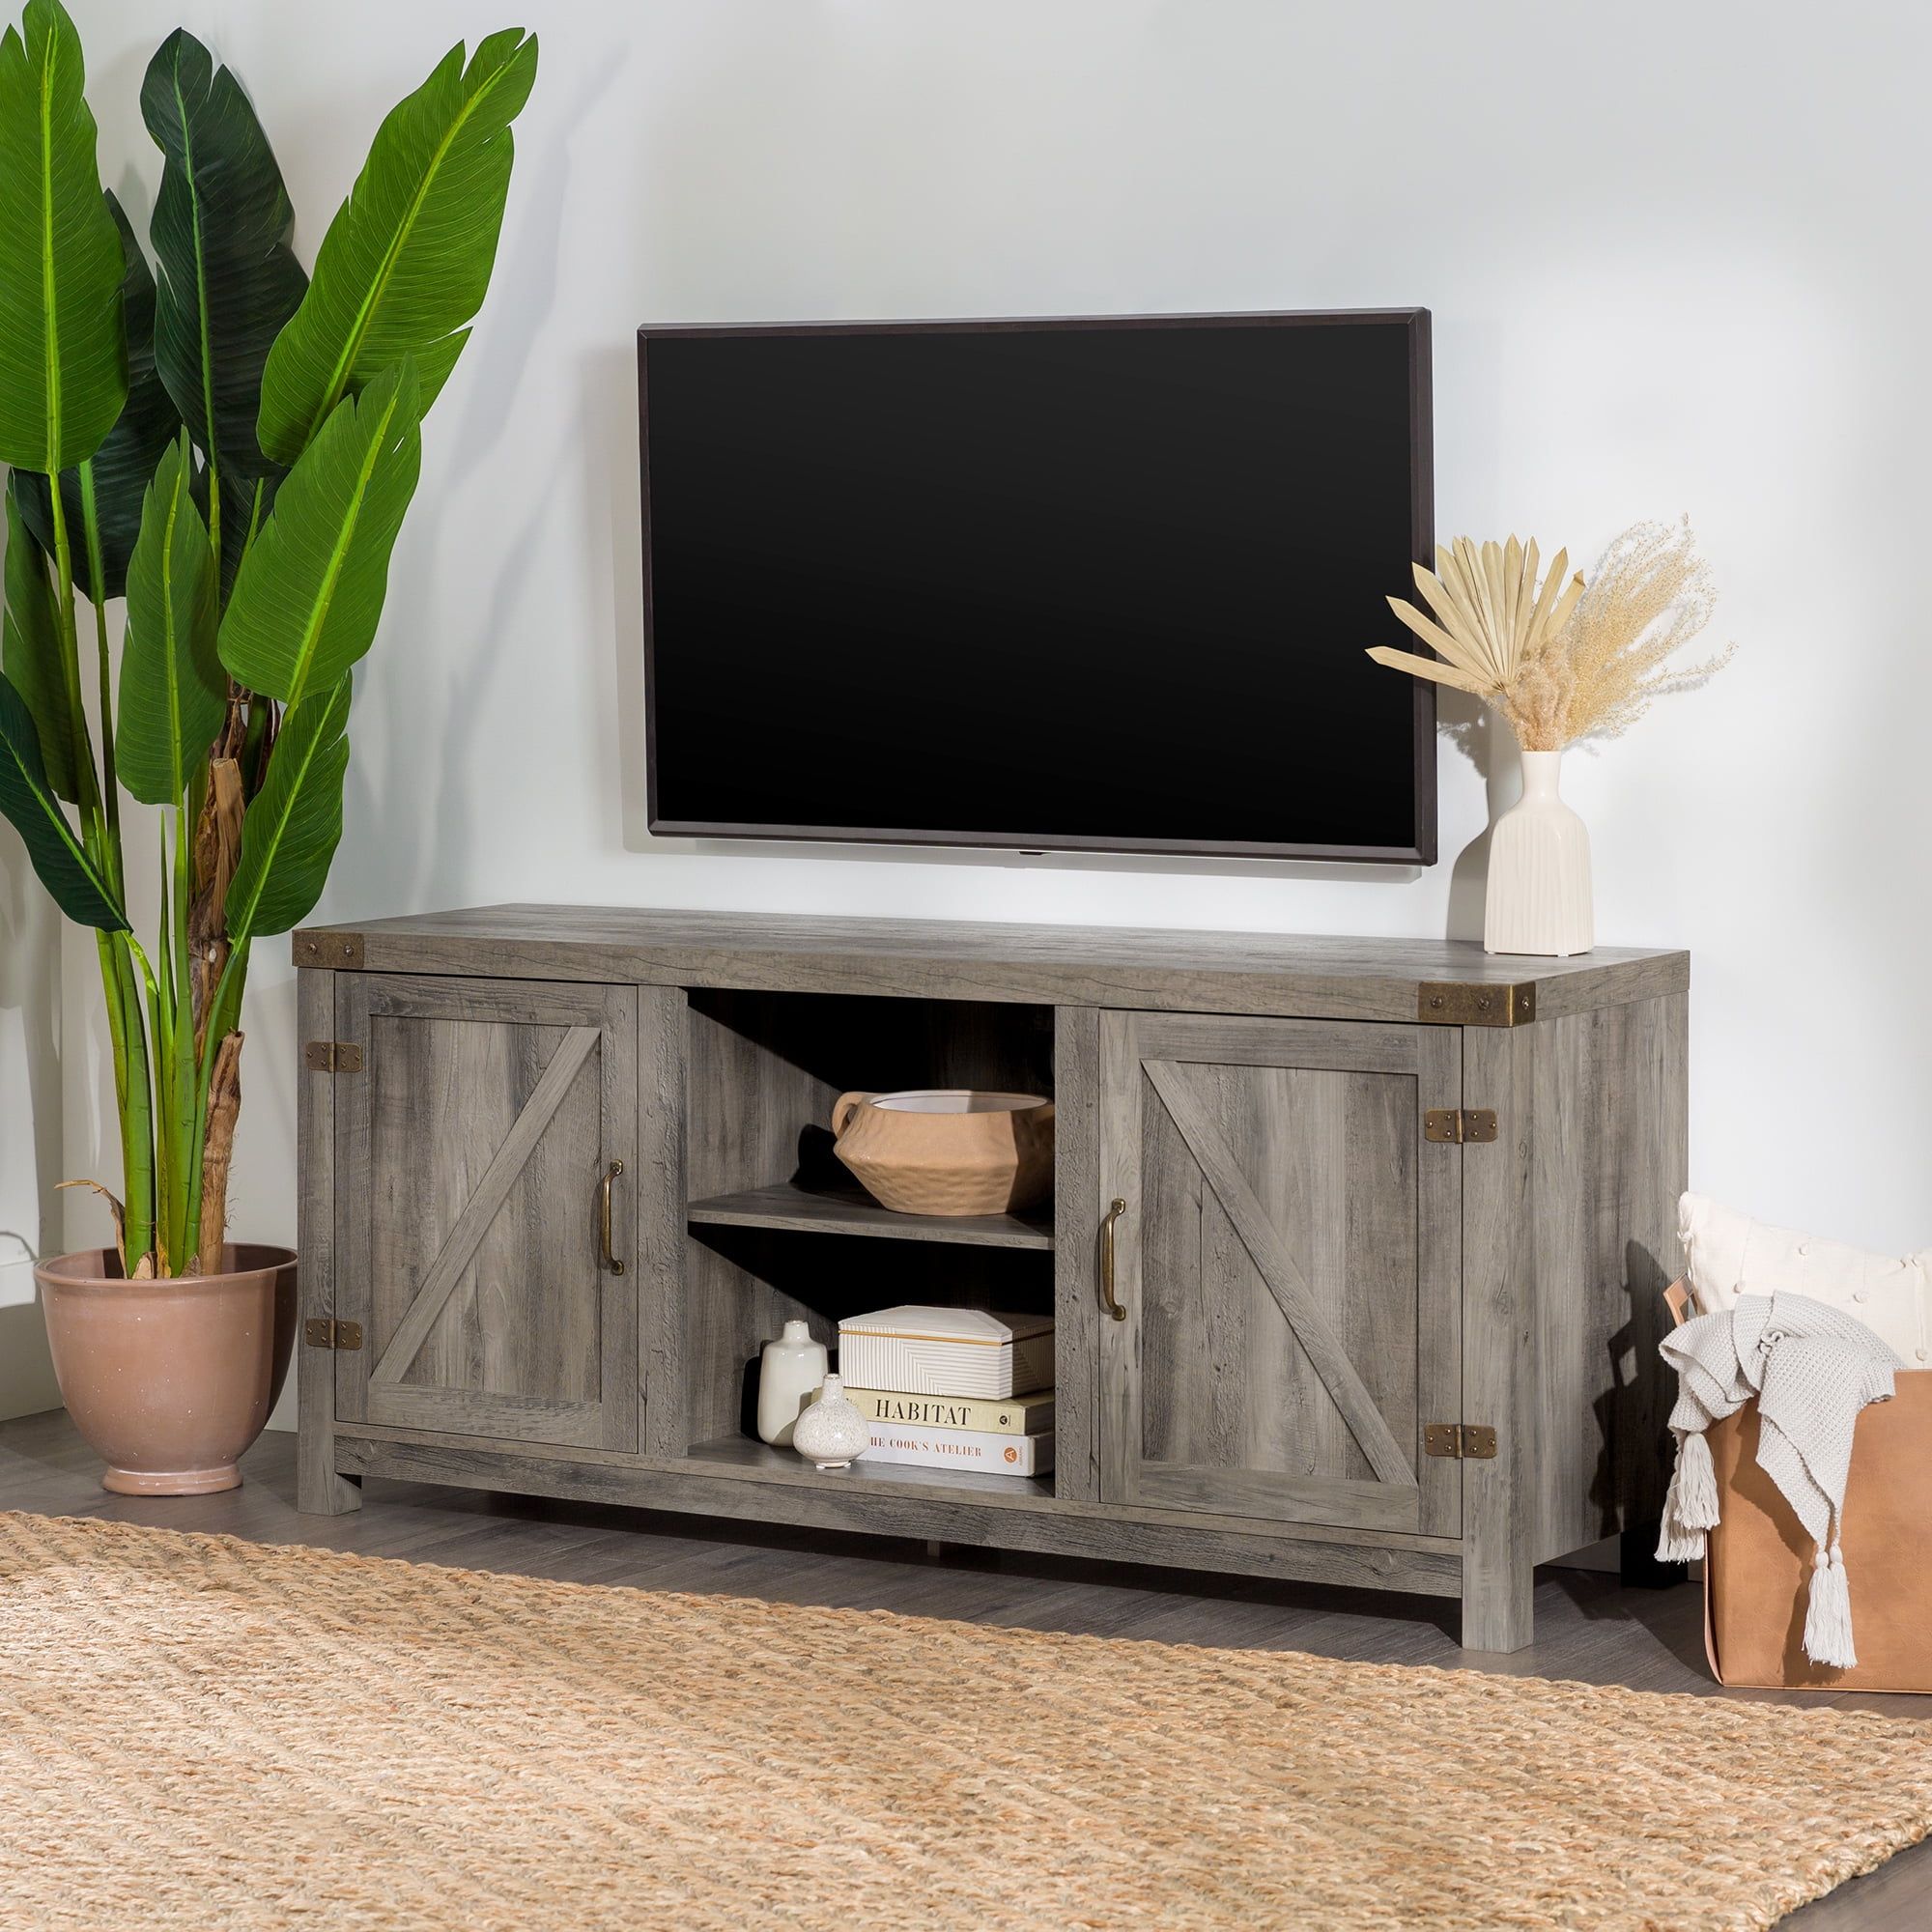 Woven Paths Modern Farmhouse Barn Door Tv Stand For Tvs Up To 65", Grey  Wash – Walmart Regarding Farmhouse Stands For Tvs (Photo 3 of 15)